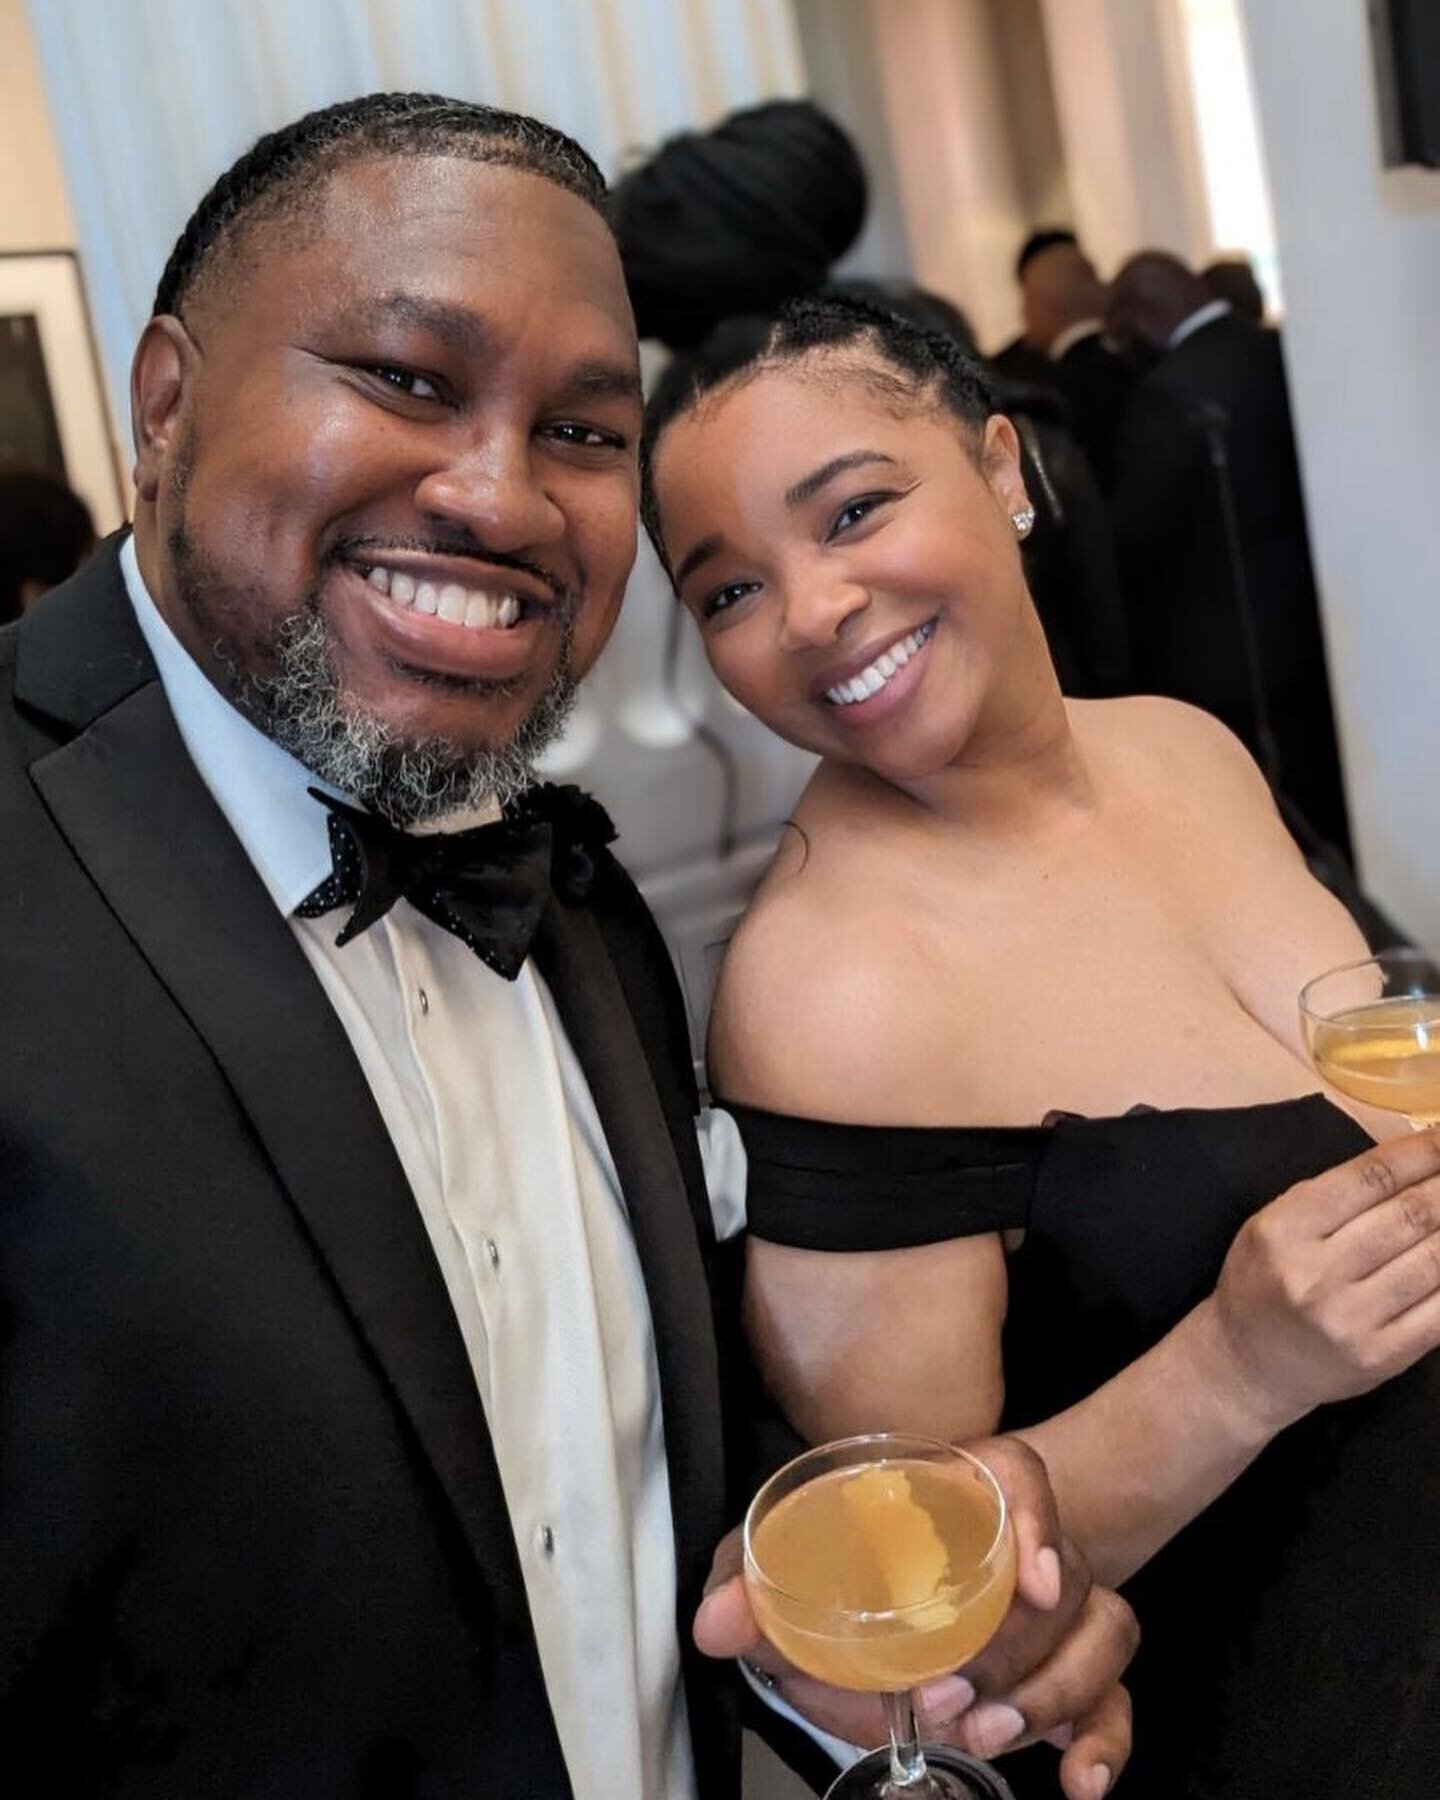 What a weekend and what a wedding! 🥰 

My Pisces sister @sevetriwilson was such a beautiful bride. As one of the most genuine and gentle souls I know, so happy and many blessings to the union of @sevetriwilson and @aulstontaylor. ❤️